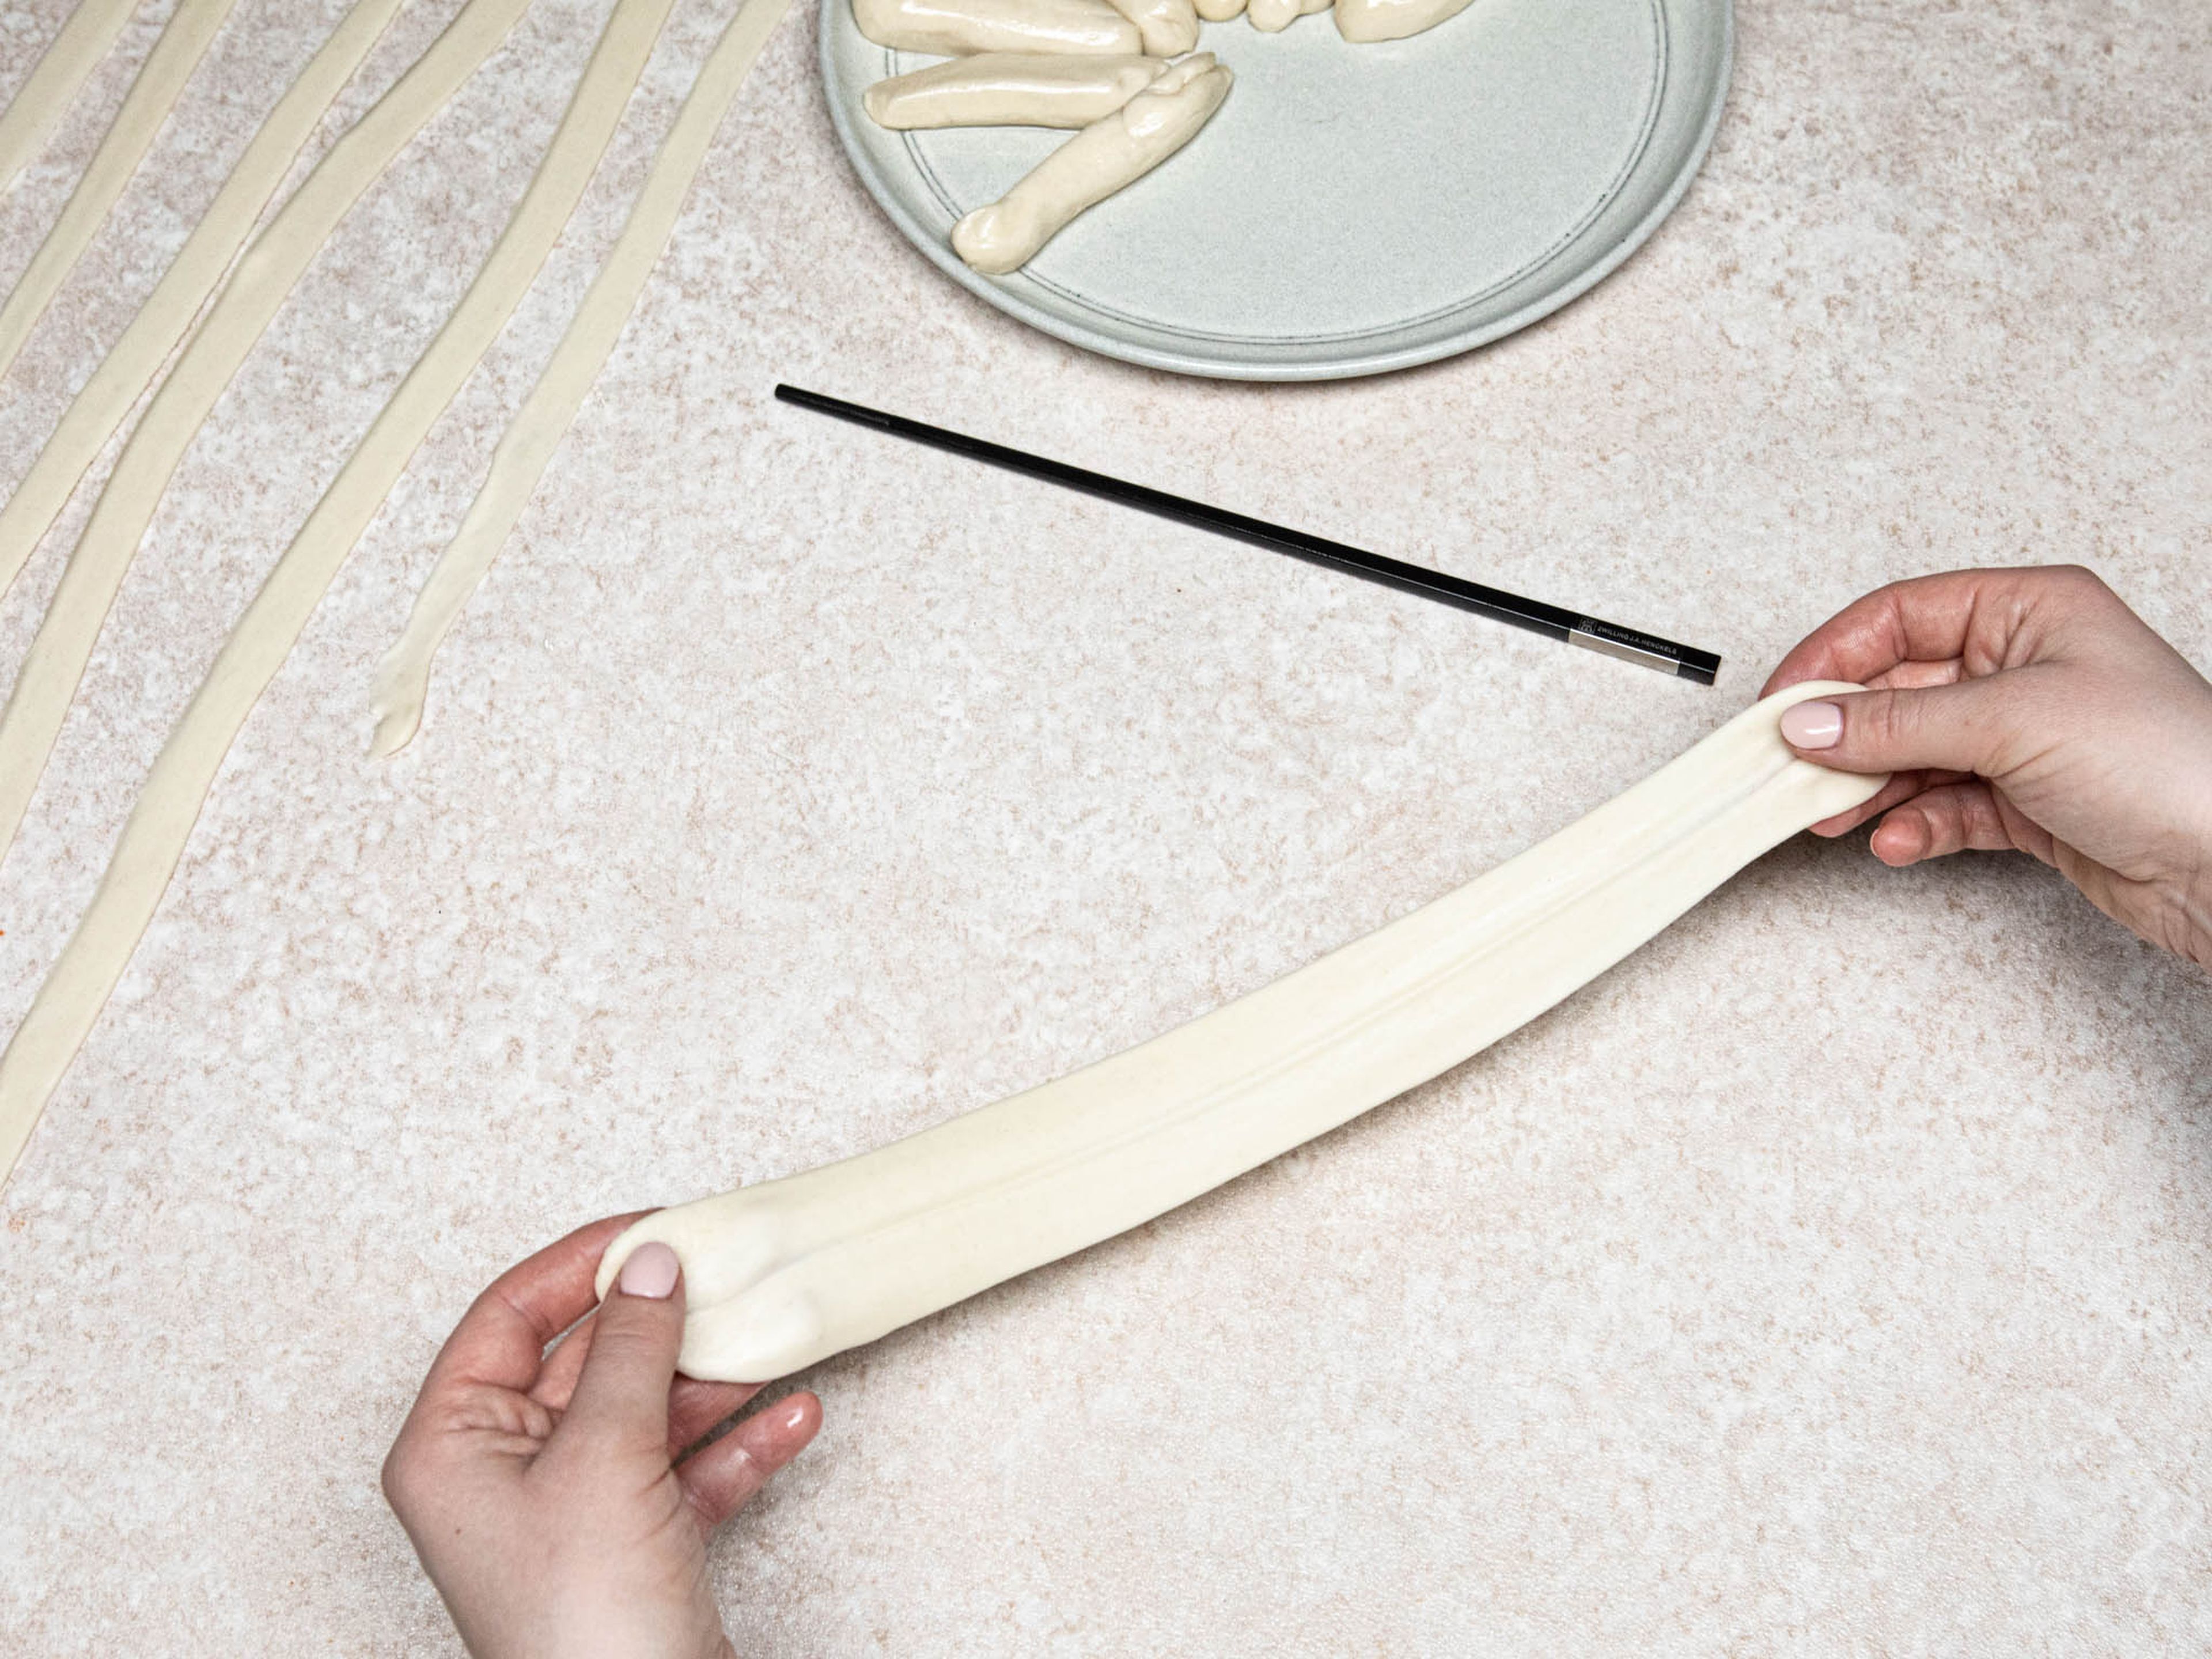 Gently tug on each end of the rectangles to slightly stretch it, then lightly hit it against the working surface. Separate the noodles where the chopstick was pressed into.